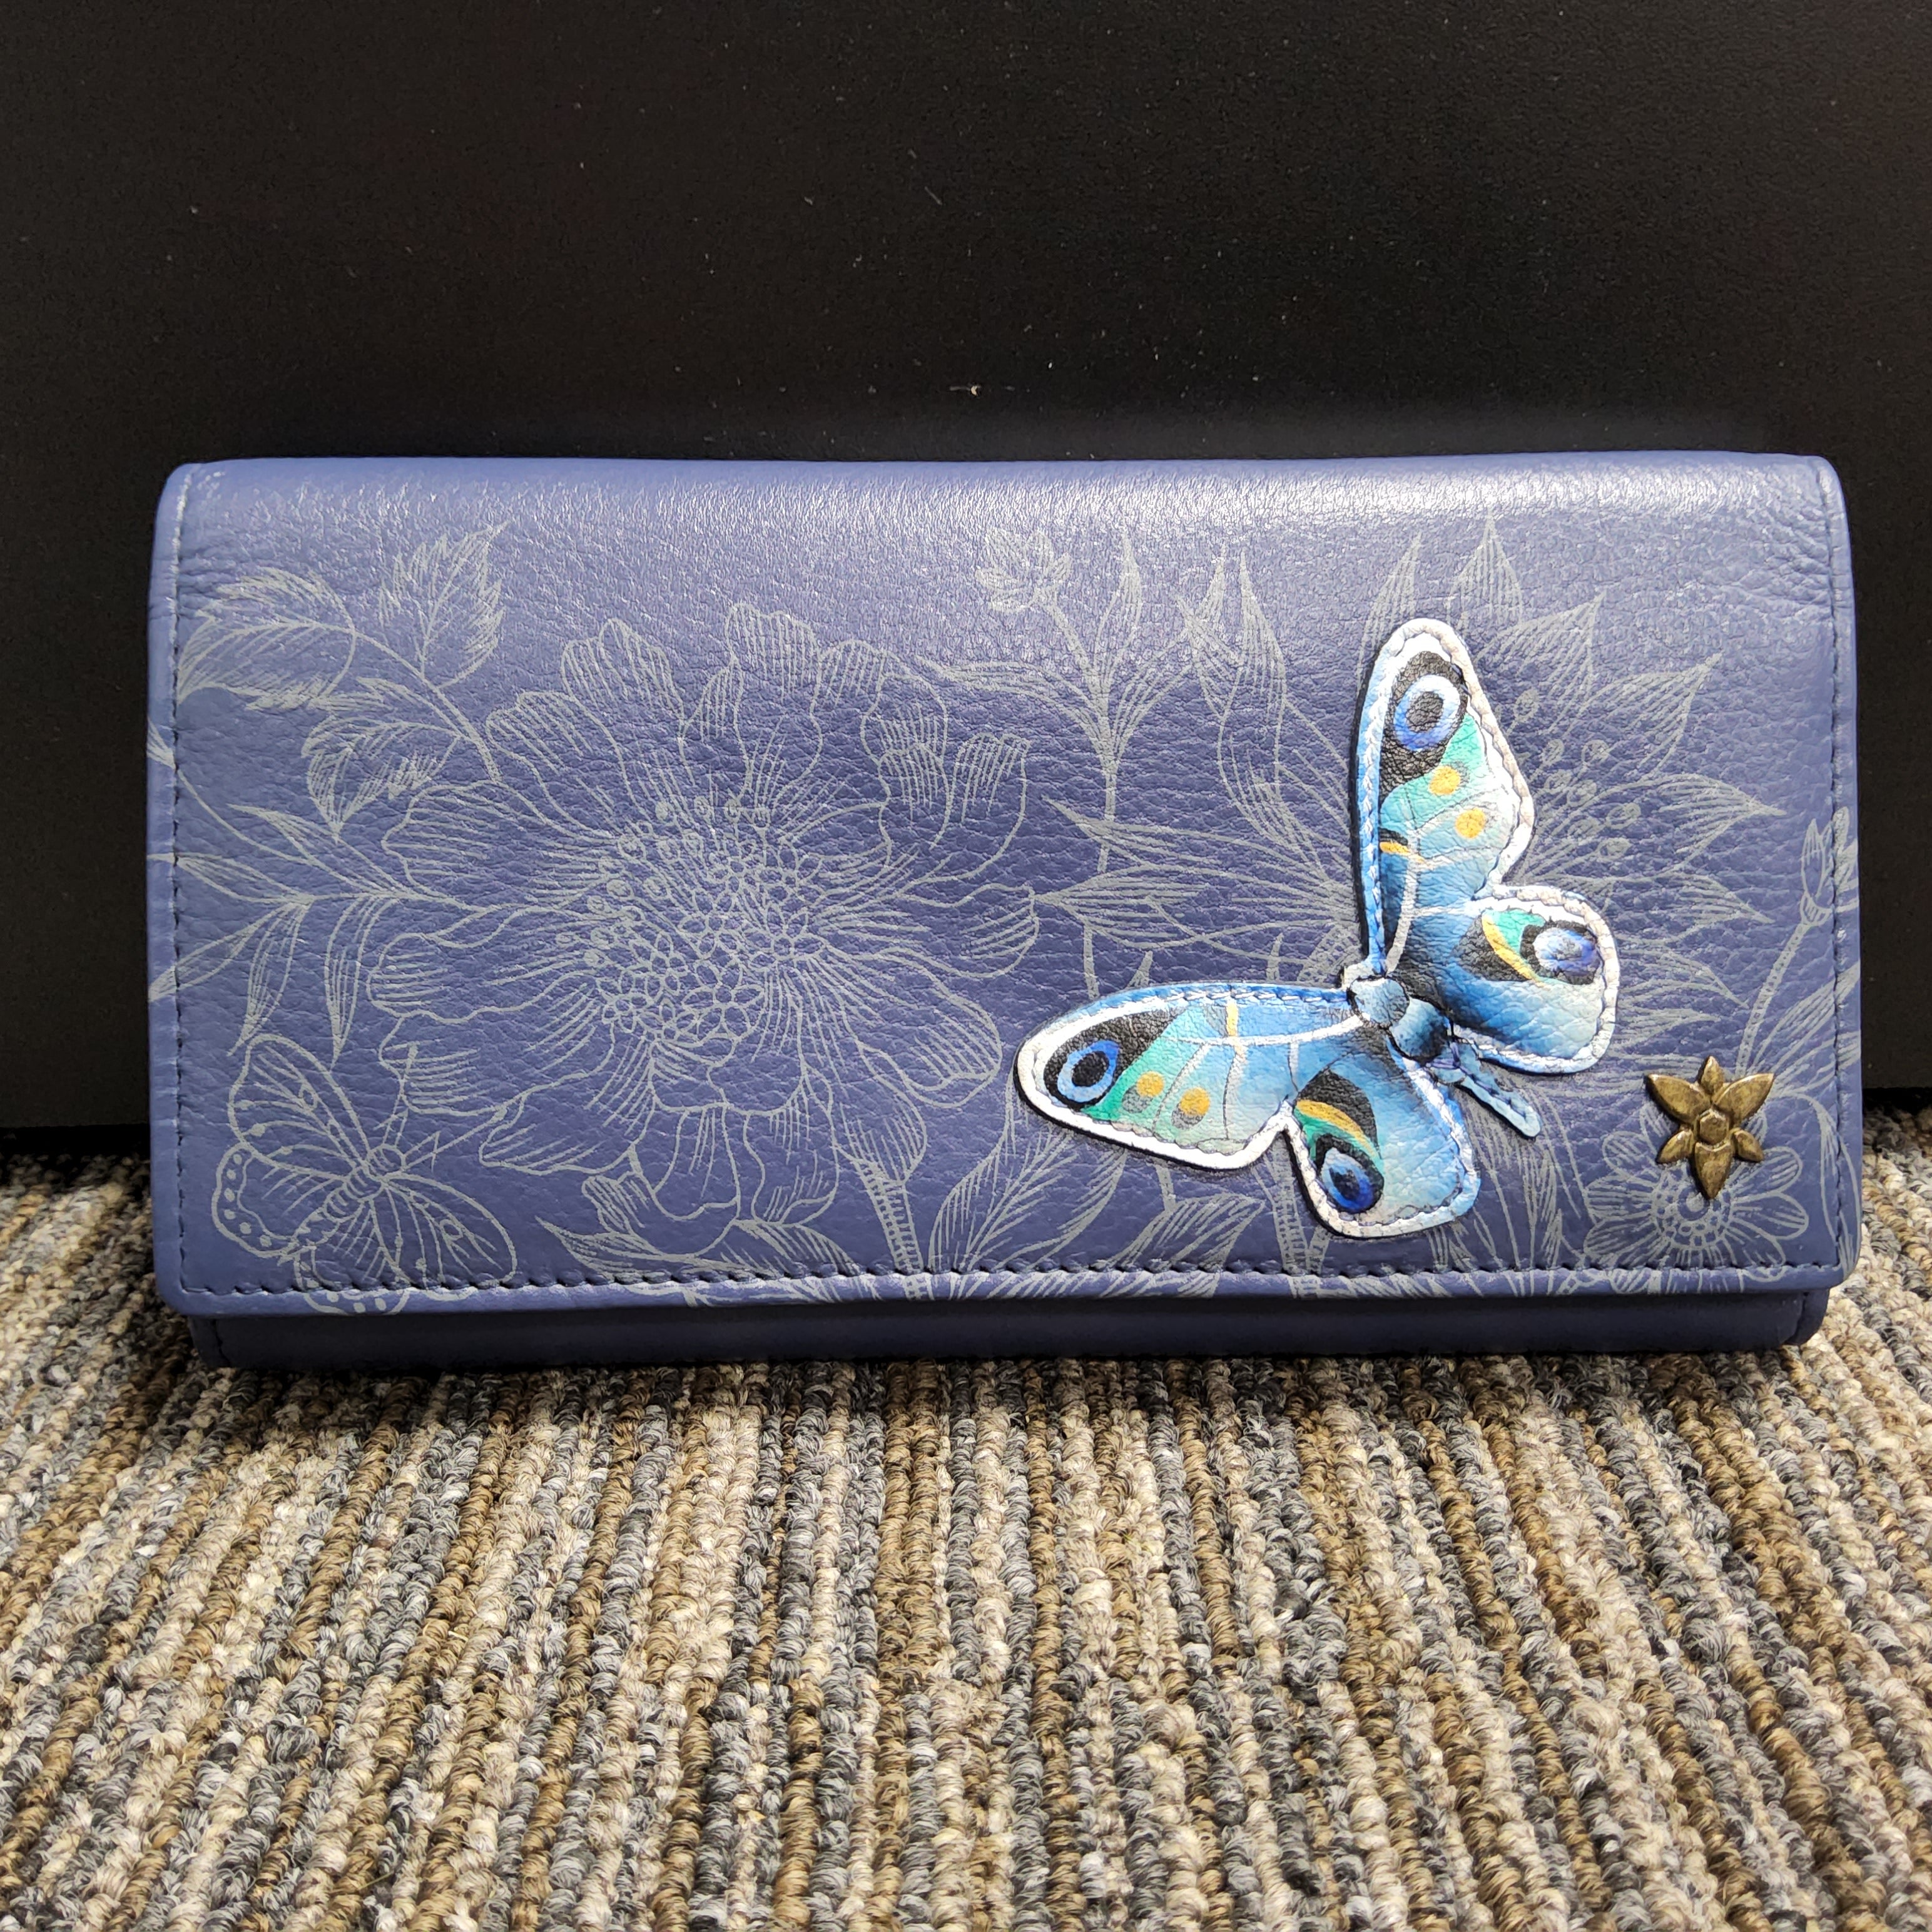 Anuschka Leather Triple Fold Clutch Wallet - "Garden of Delights" Hand painted - RFID 1150-GDD